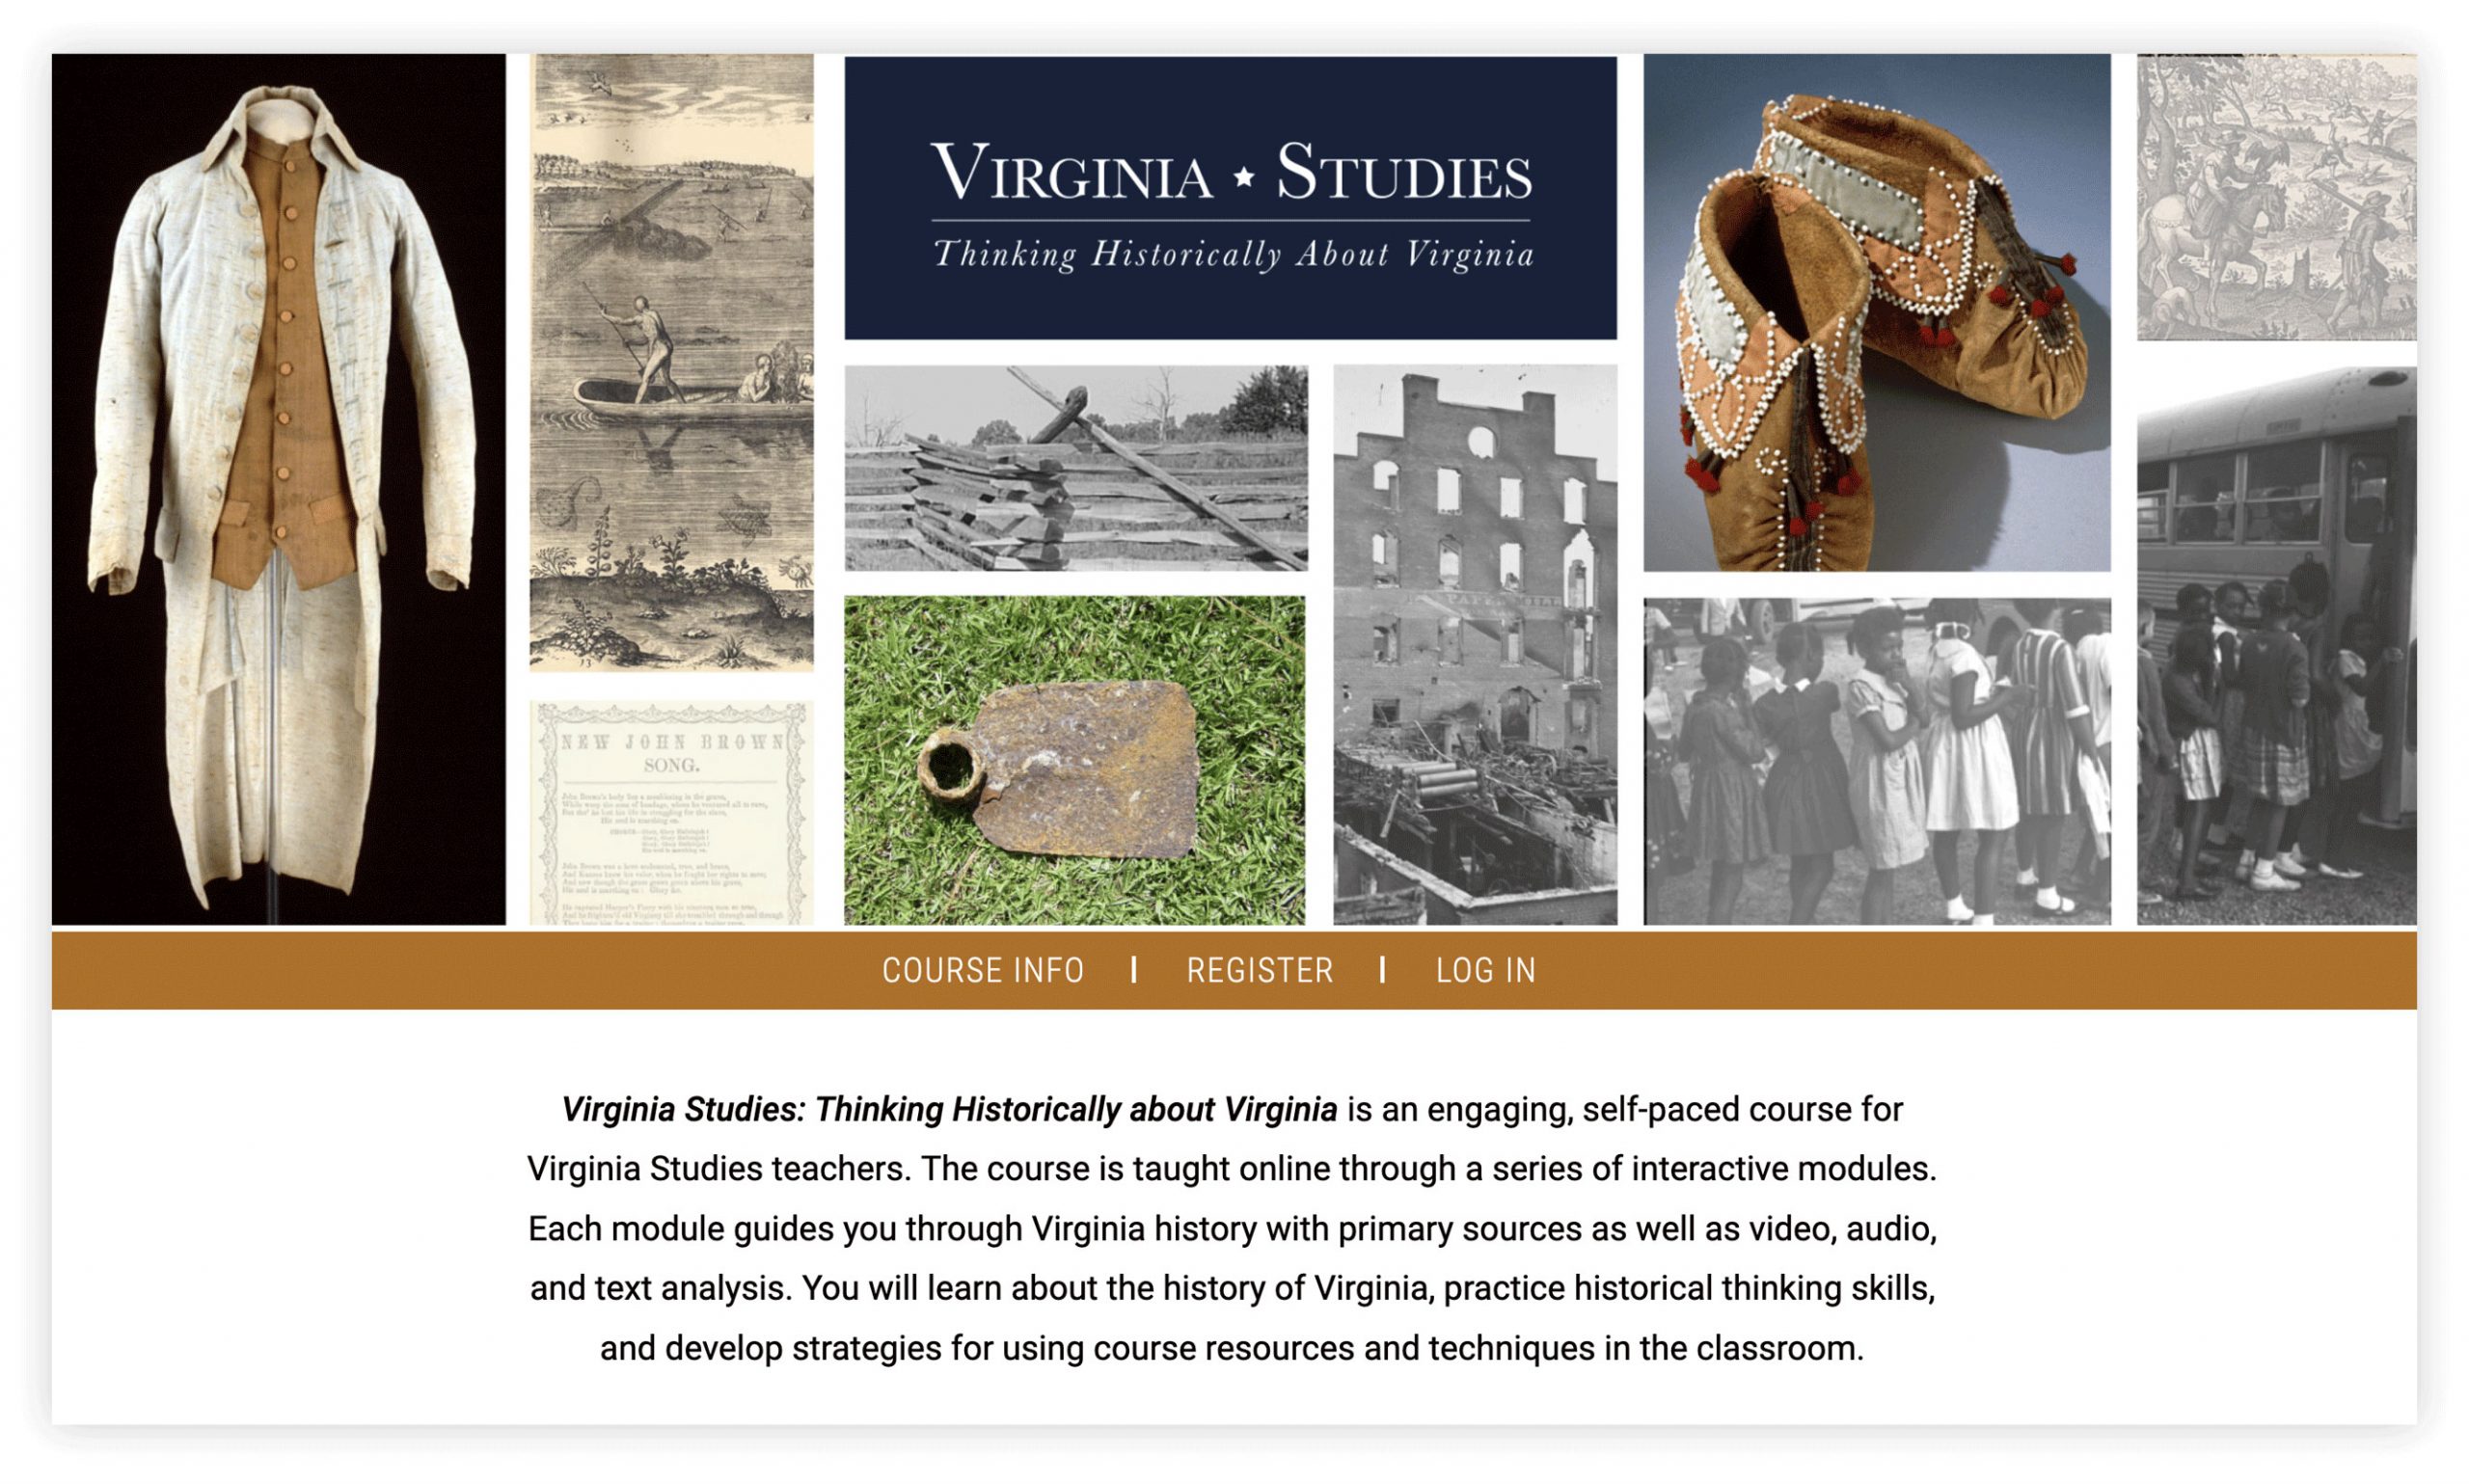 Screengrab of the Virginia Studies website landing page which reads, "Virginia Studies: Thinking Historically about Virginia is an engaging, self-paced course for Virginia Studies teachers. The course is taught online through a series of interactive modules. Each module guides you through Virginia history with primary sources as well as video, audio, and text analysis. You will learn about the history of Virgina, practice historical thinking skills, and develop strategies for using course resources and techniques in the classroom."